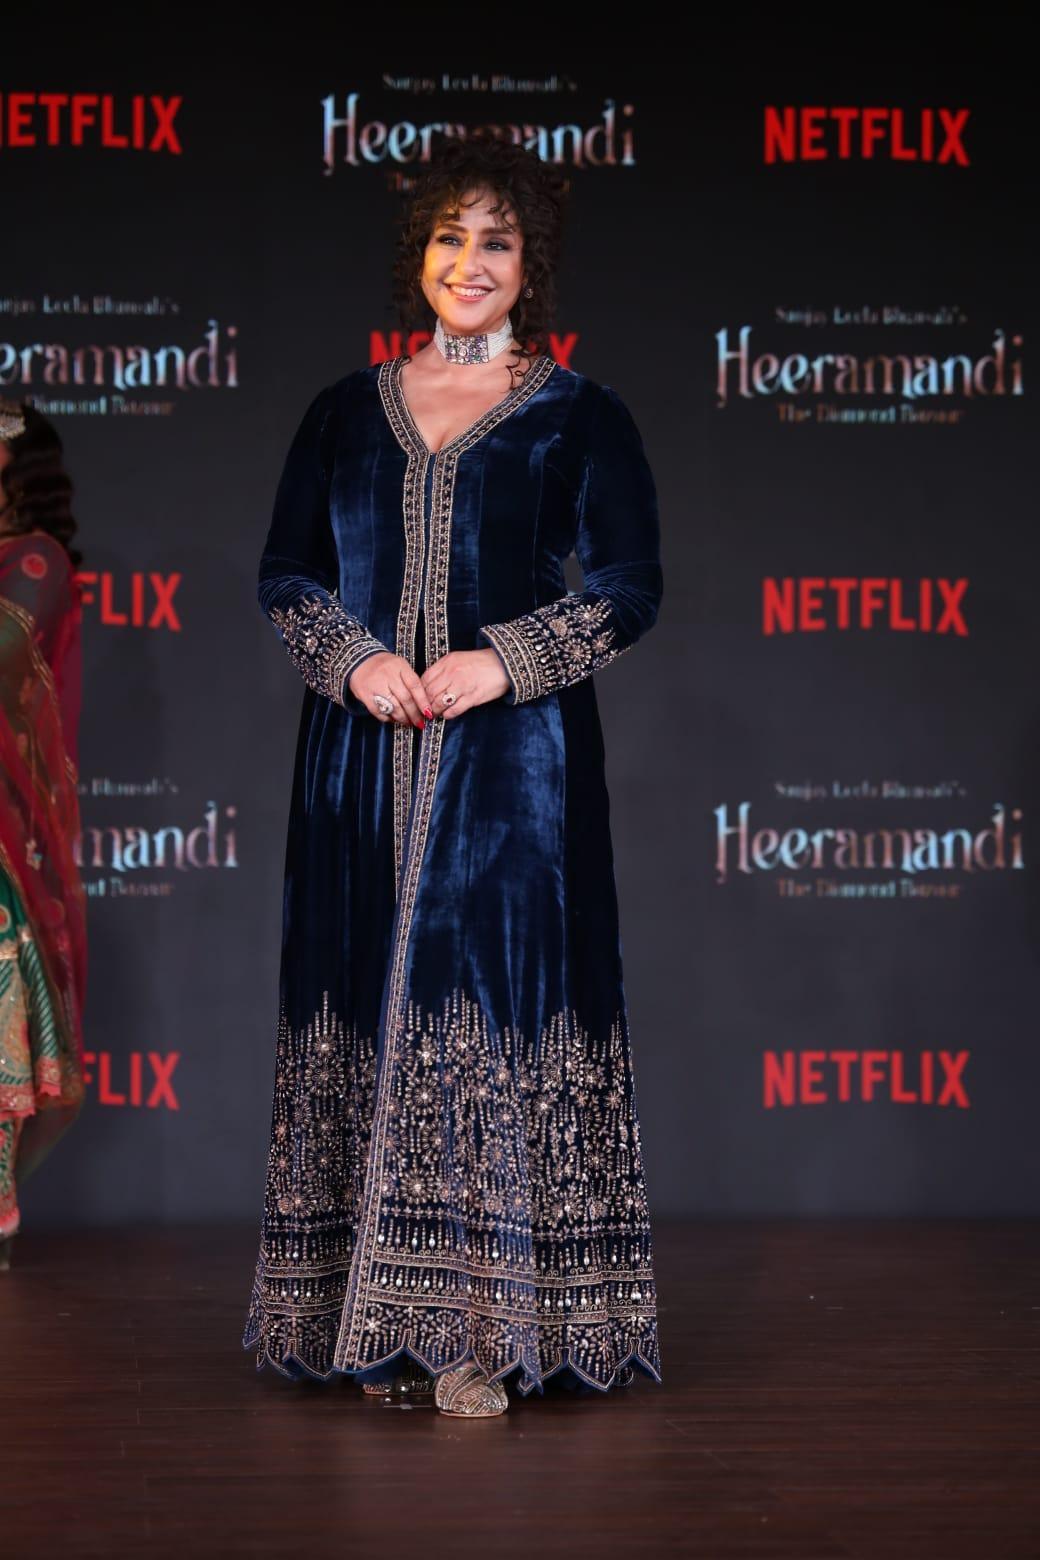 Manisha Koira wore a velvet suit at the event. The actress tied her hair in a messy hairstyle. Her smoky eyes and intricate jewellery stole the show